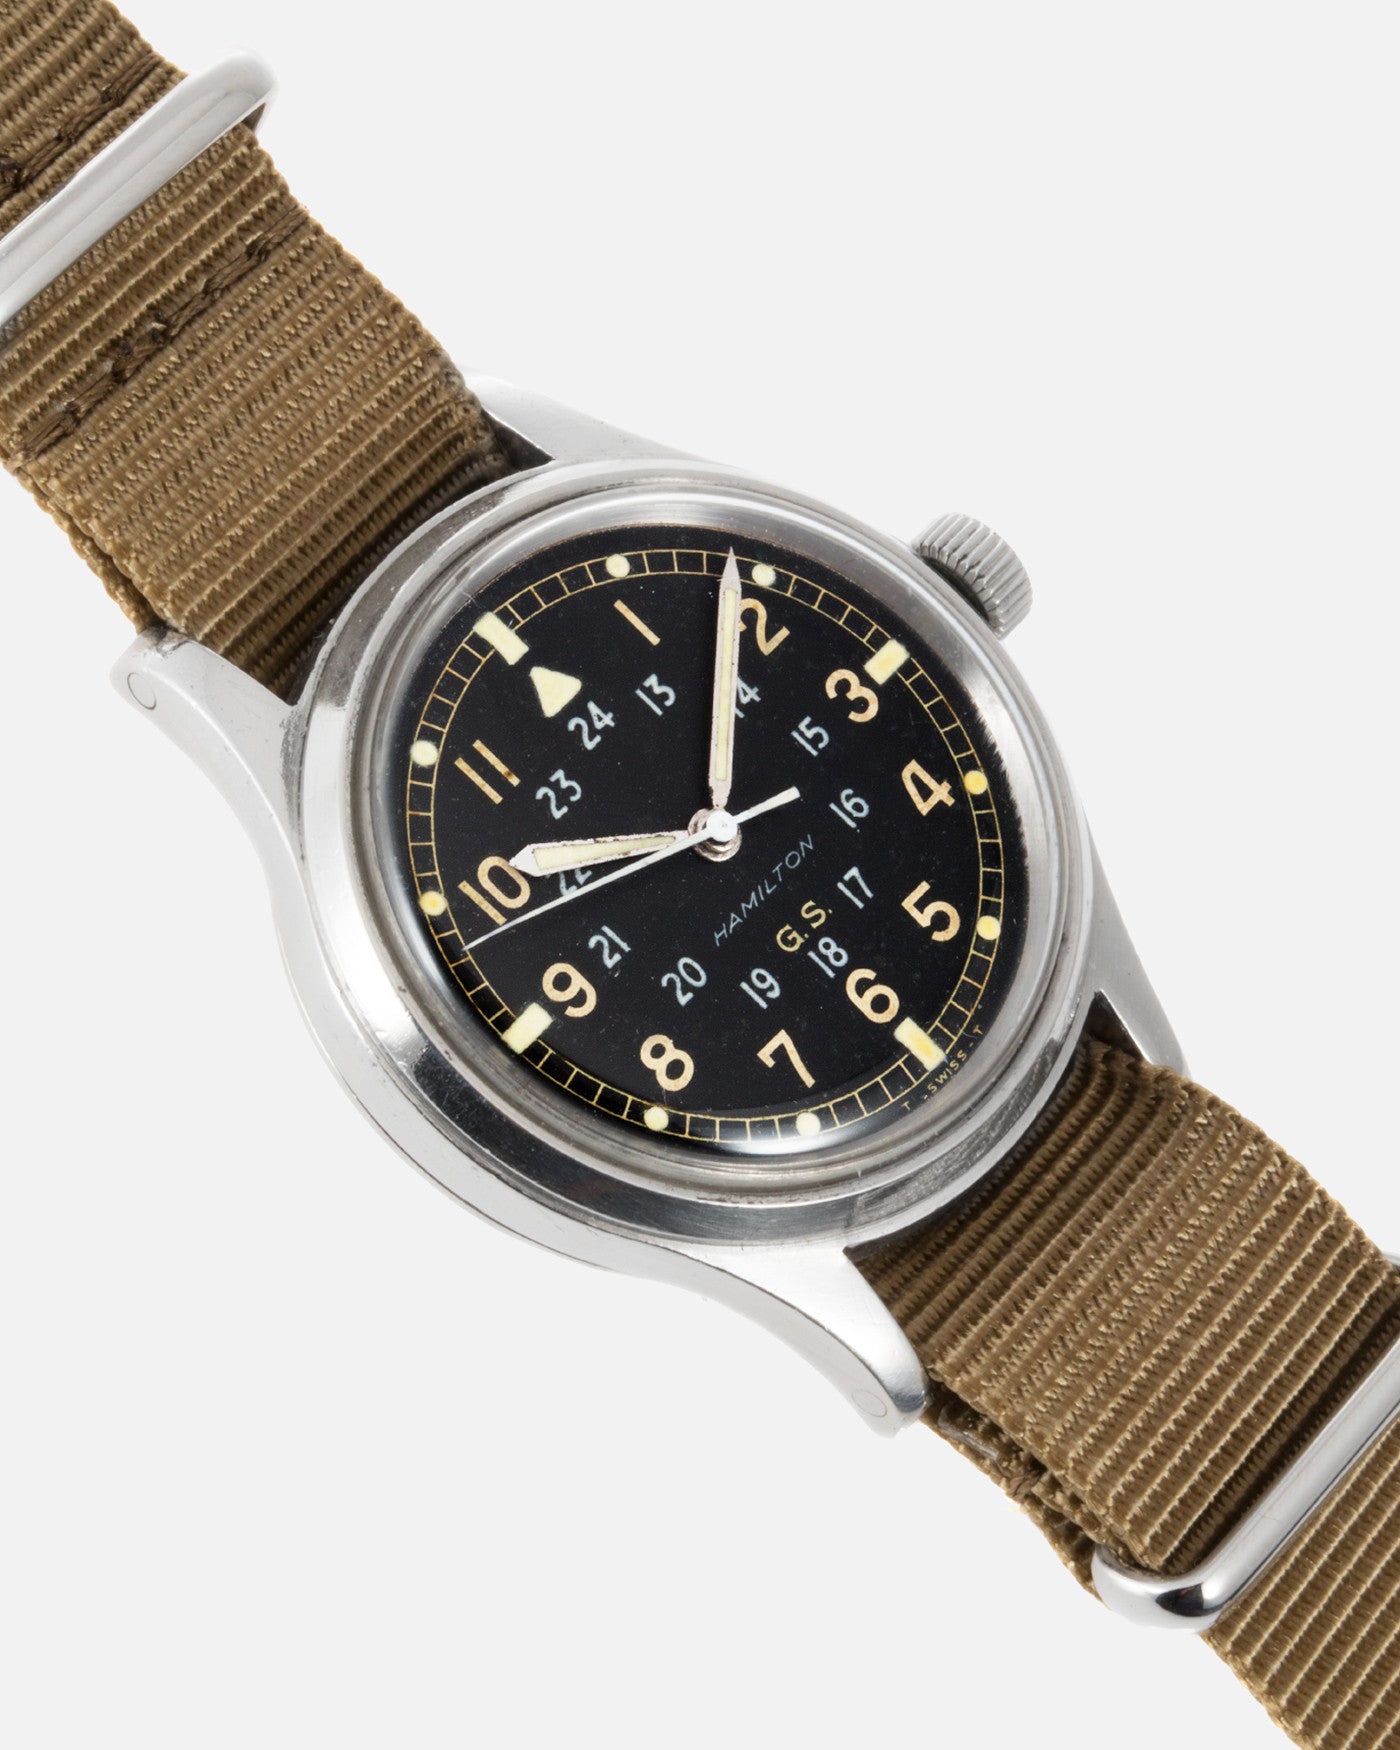 Hamilton 'G.S.' 24-Hour Dial Vintage Military Watch | S.Song Vintage ...